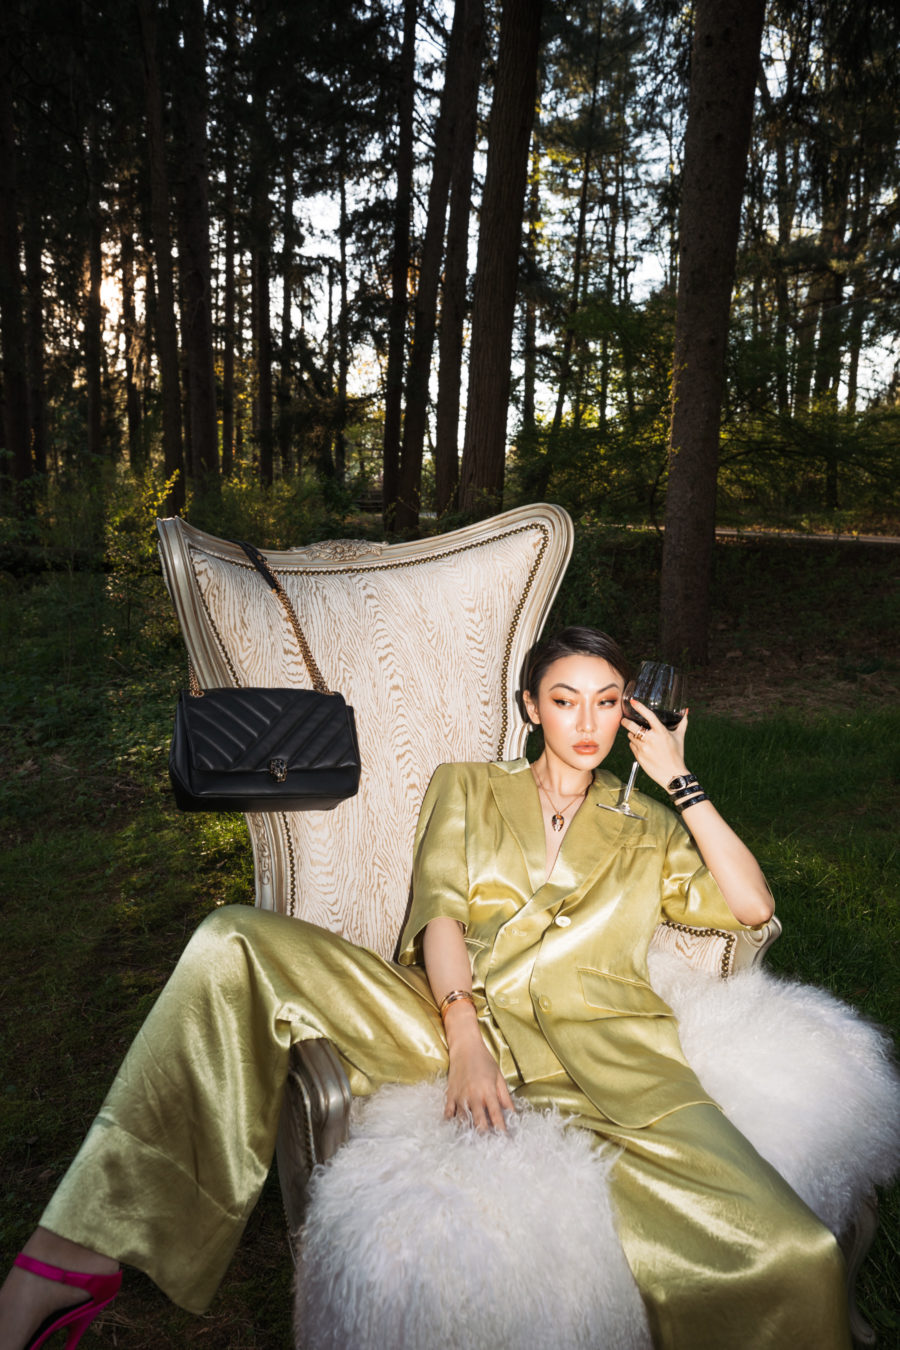 how to unwind after a long day - glass of wine outside // Jessica Wang - Notjessfashion.com